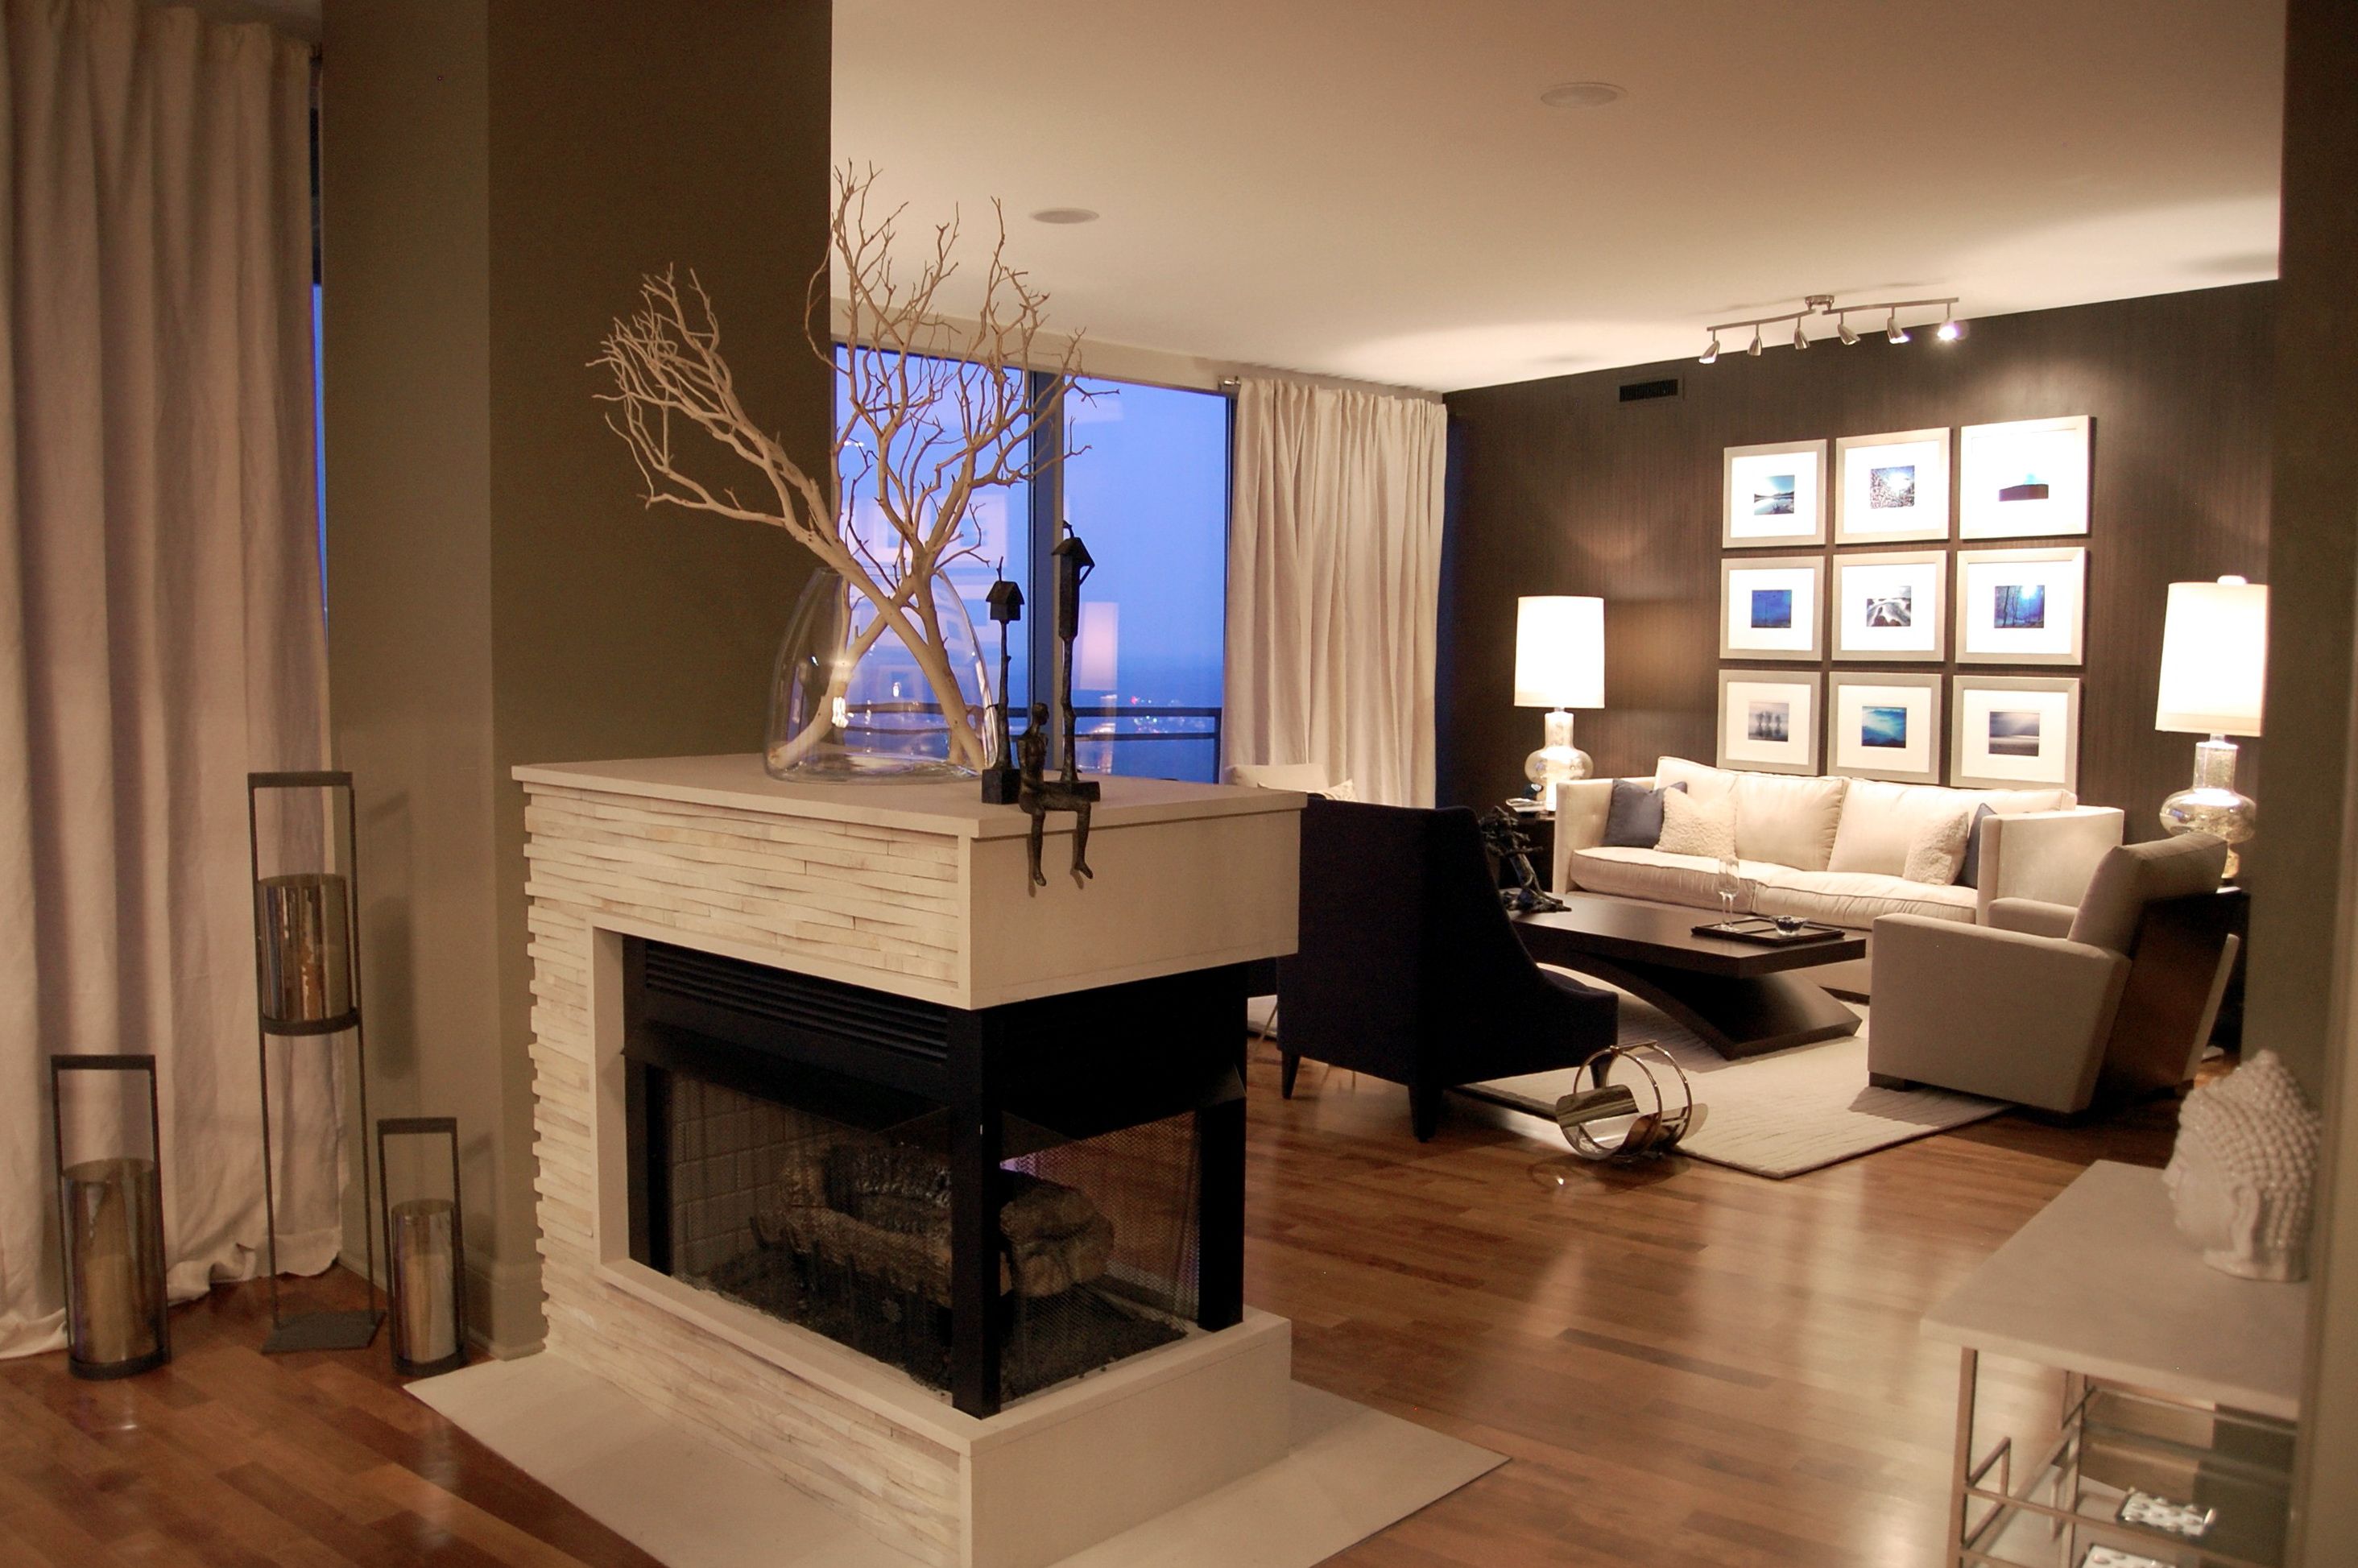 3 Sided Fireplace Best Of Three Sided Fireplace Designs